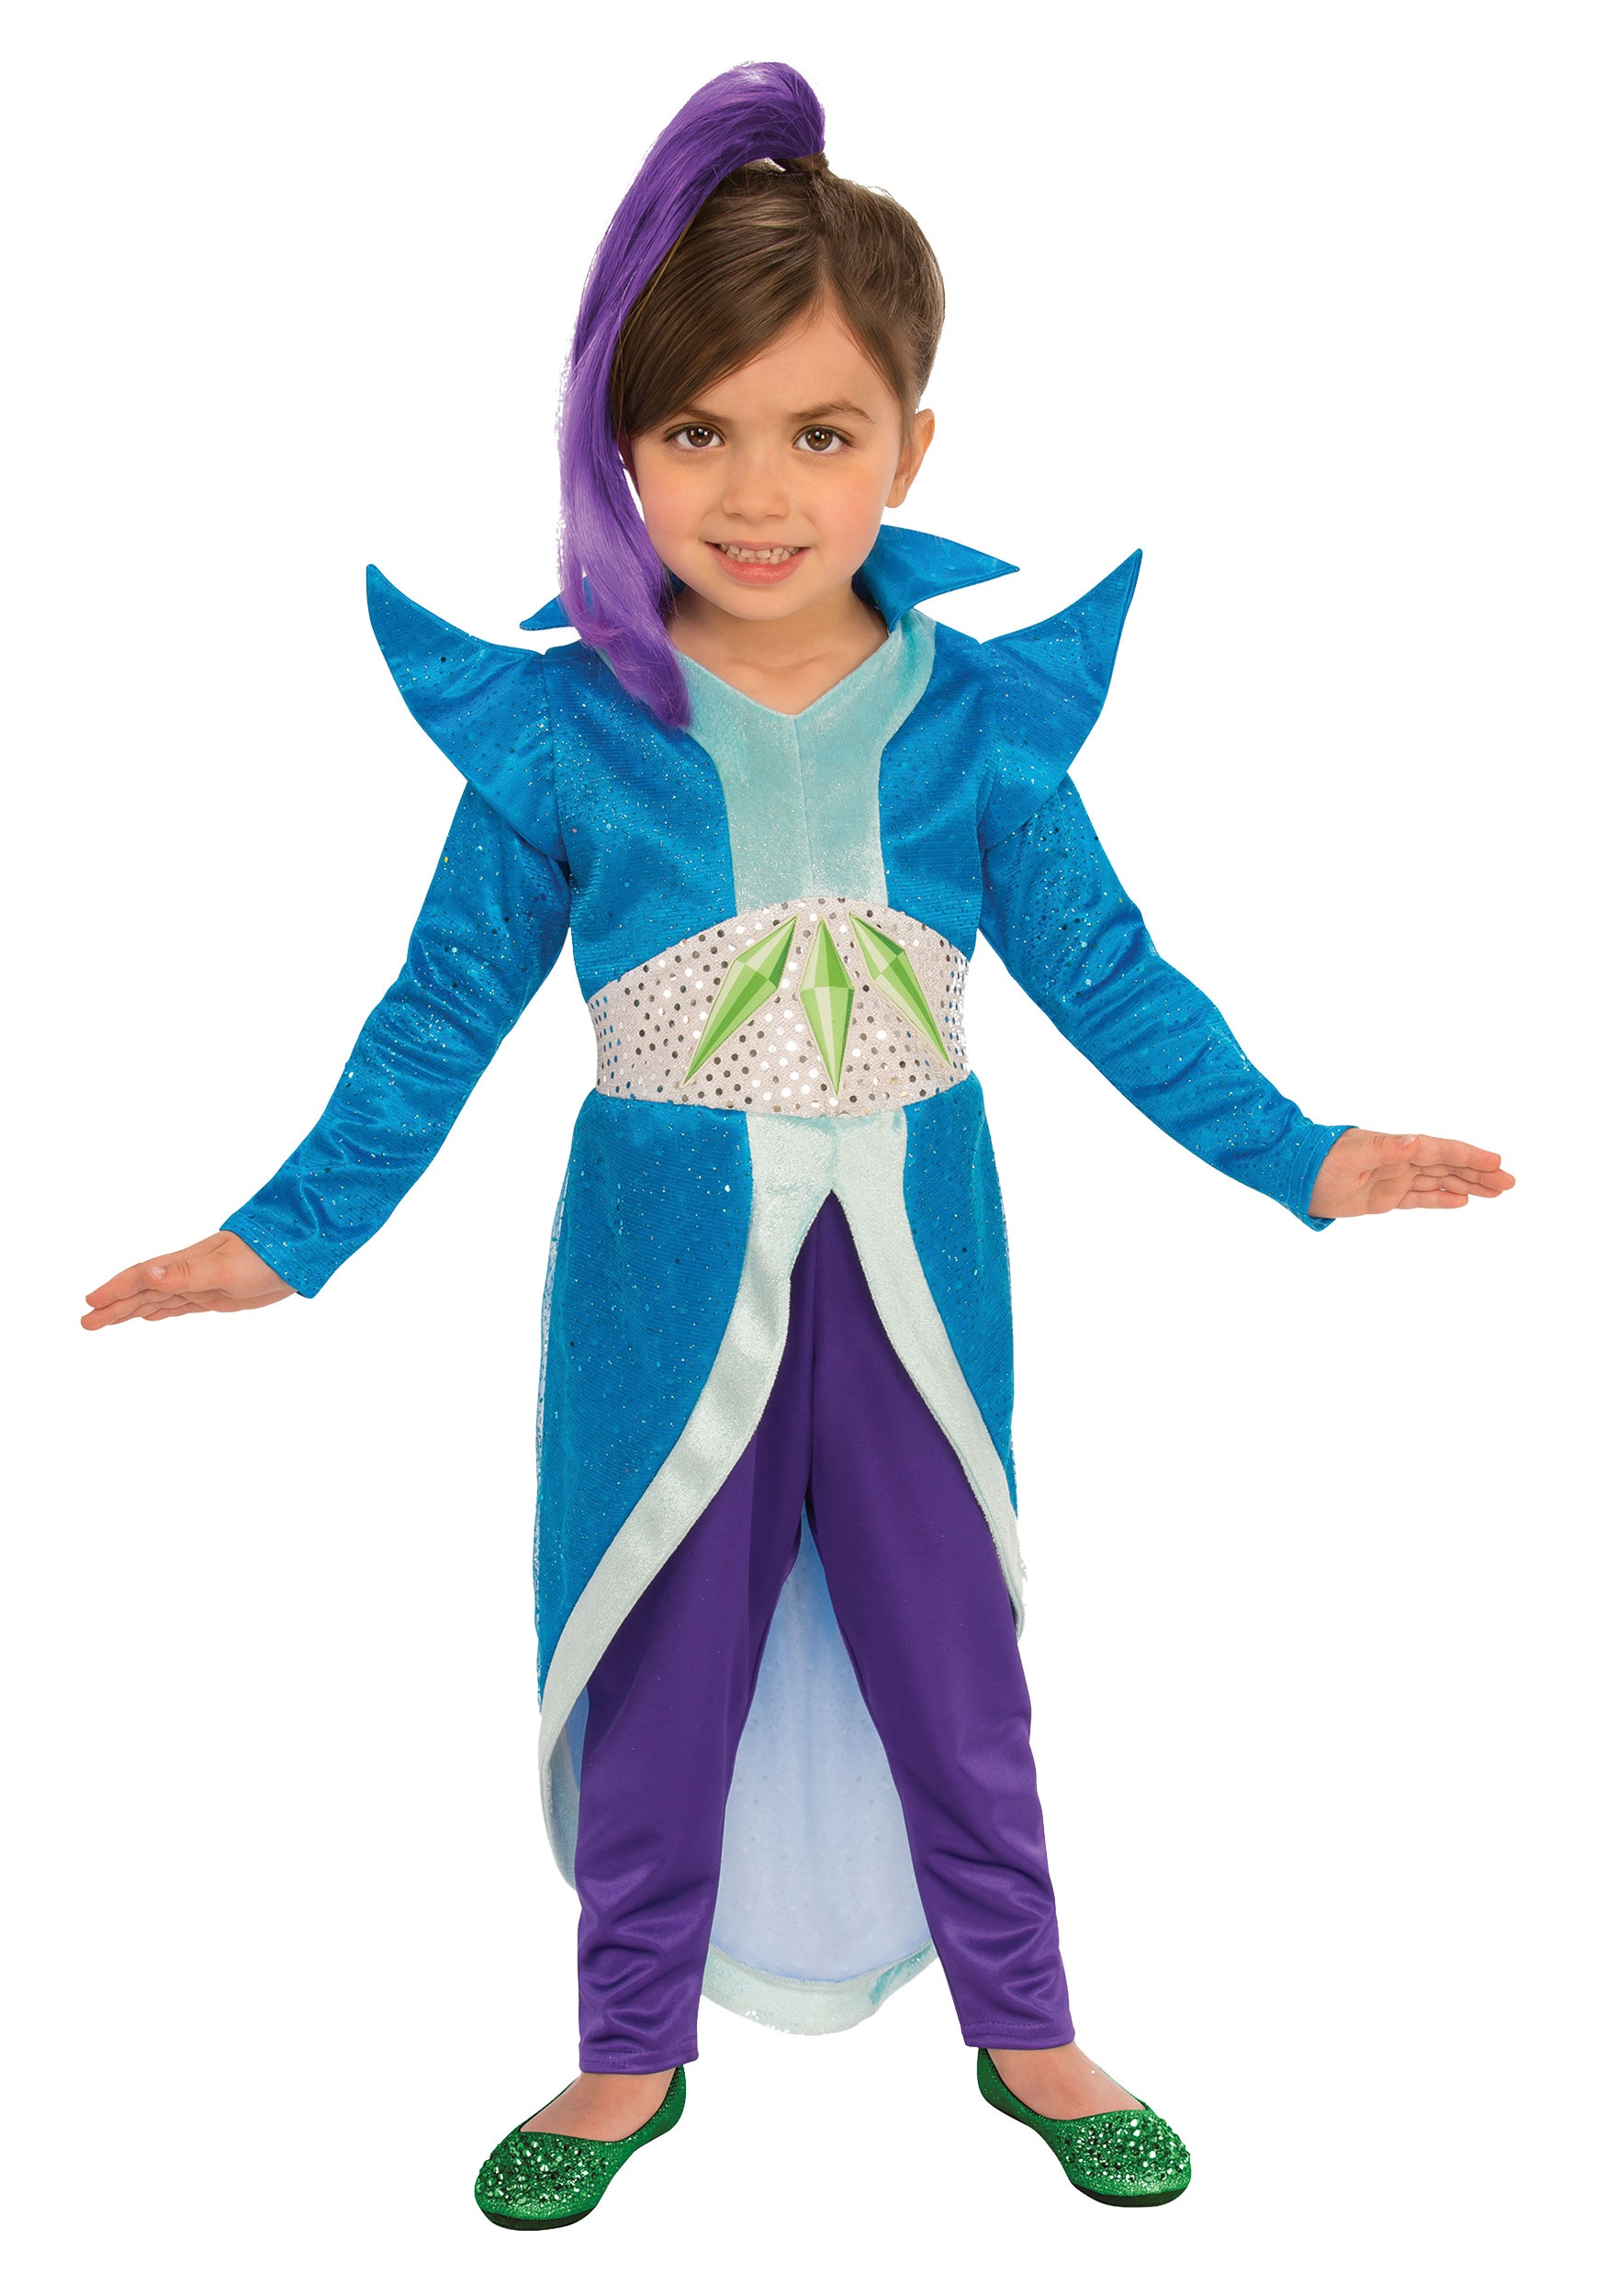 Details about   Shimmer & Shine Shine Dress Up Costume w/ Jumpsuit Cuffs & Hairpiece Sz XS 3-4 